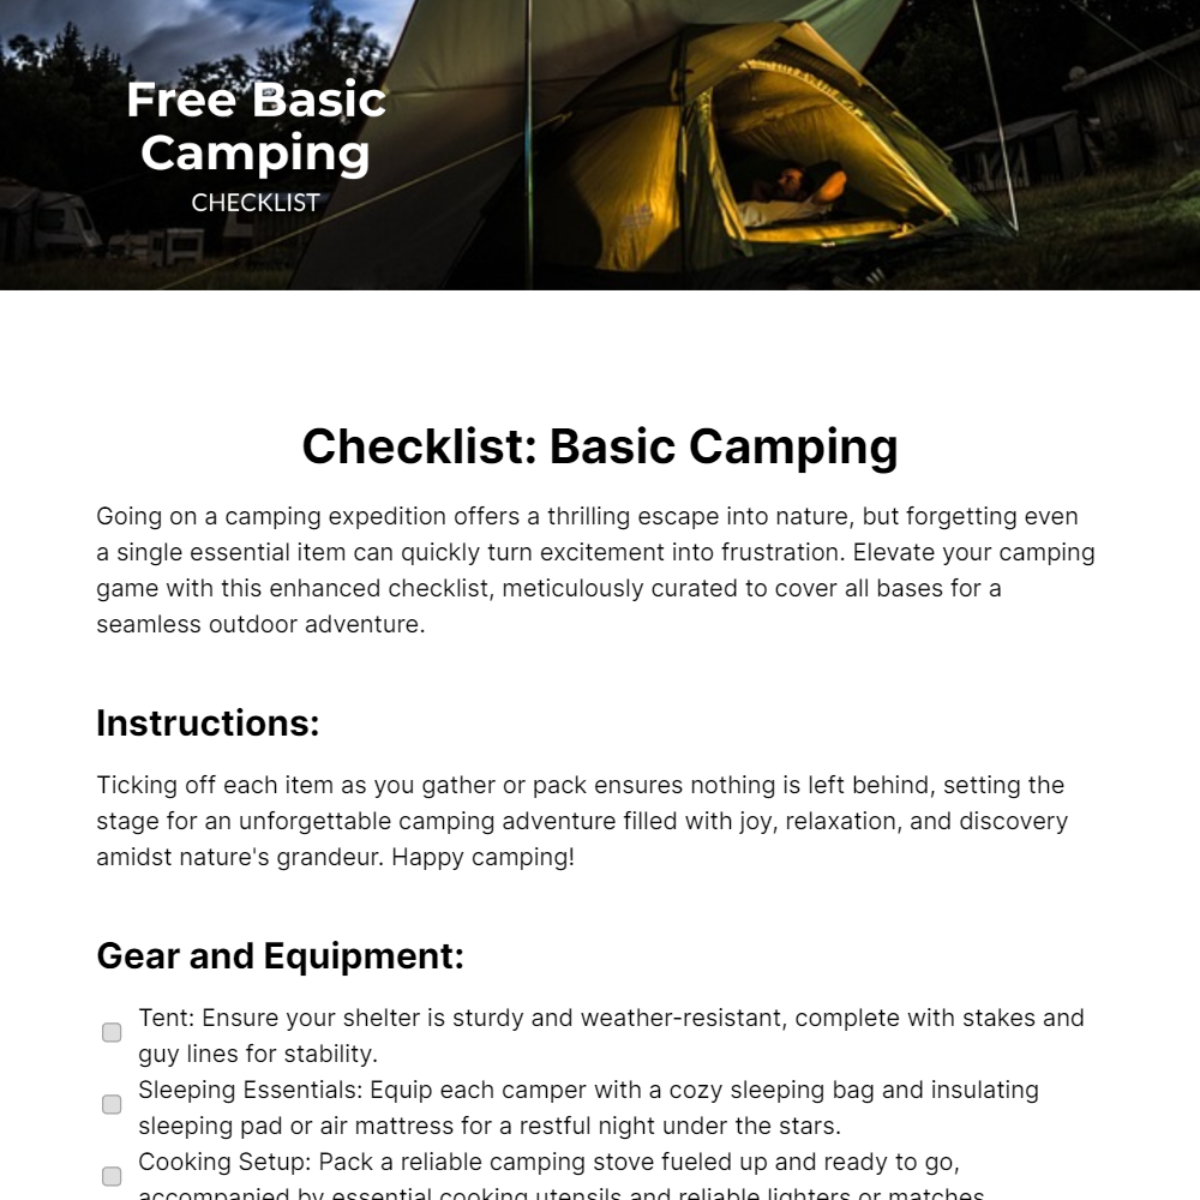 Free Basic Camping Checklist Template